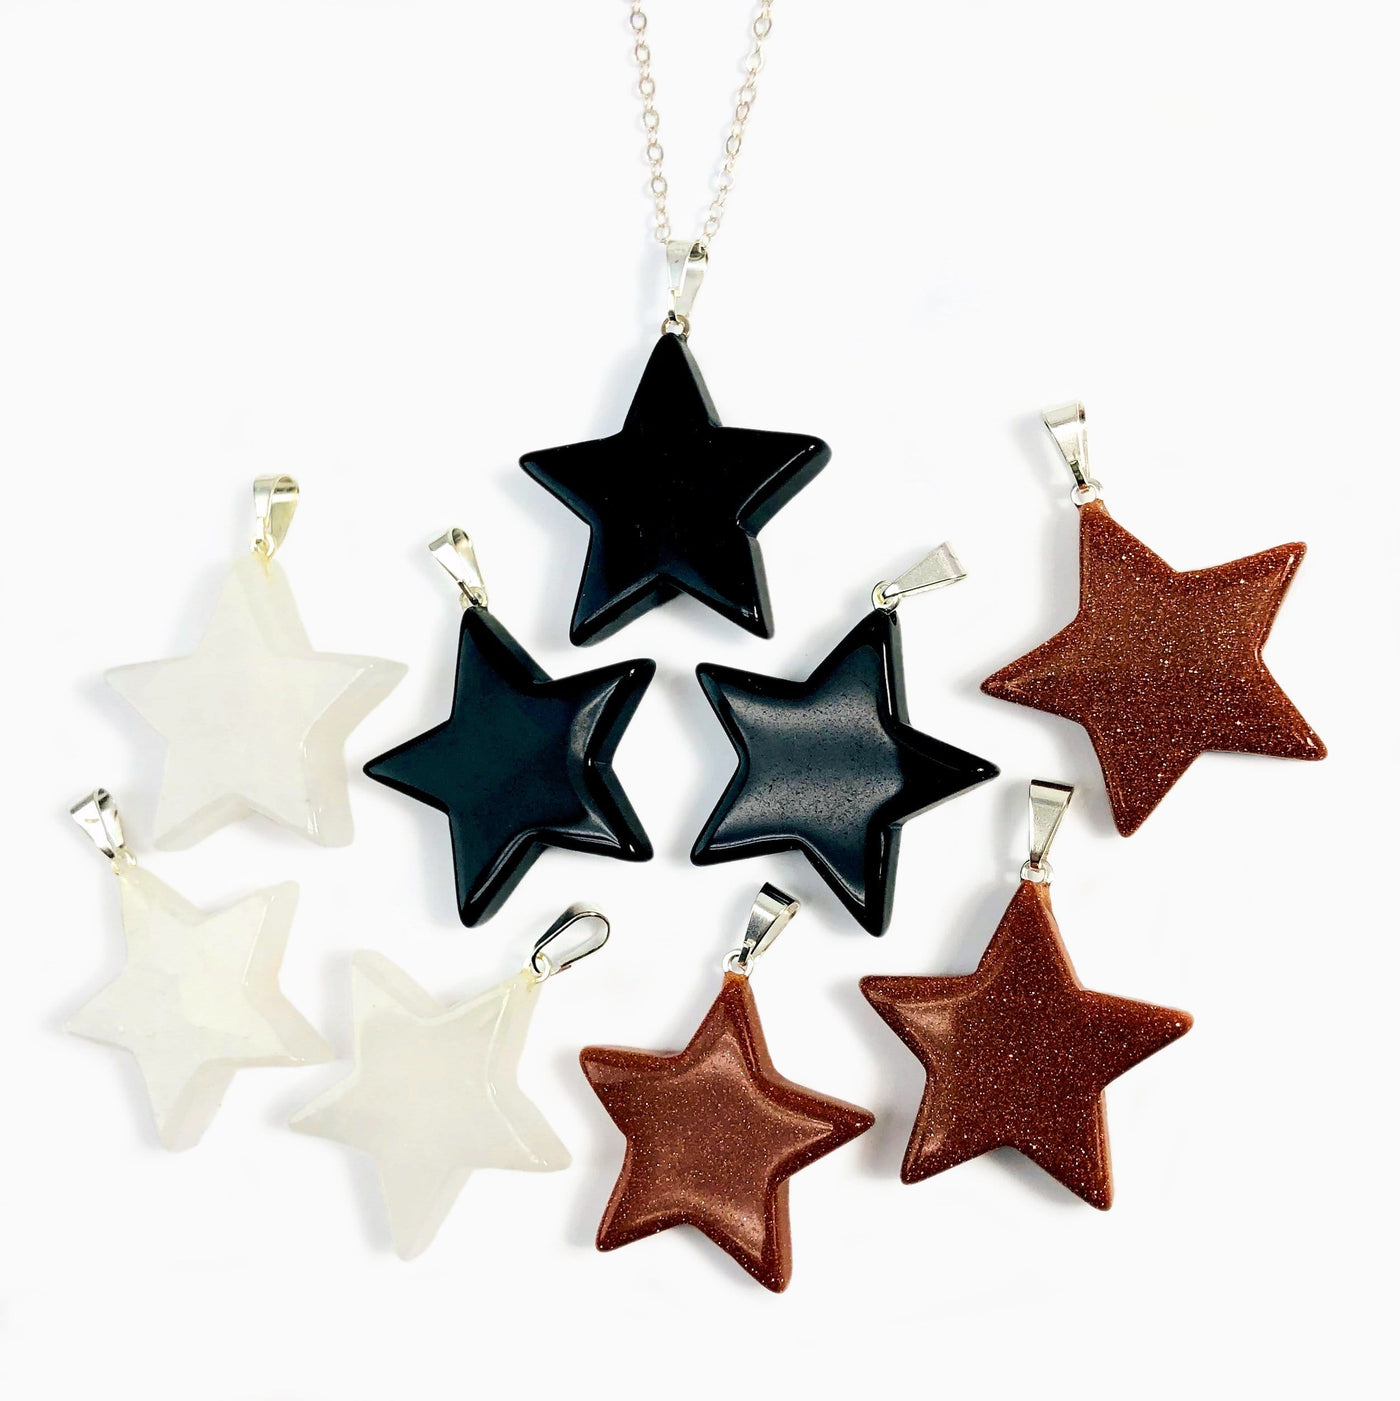 star pendants displayed on necklace chain